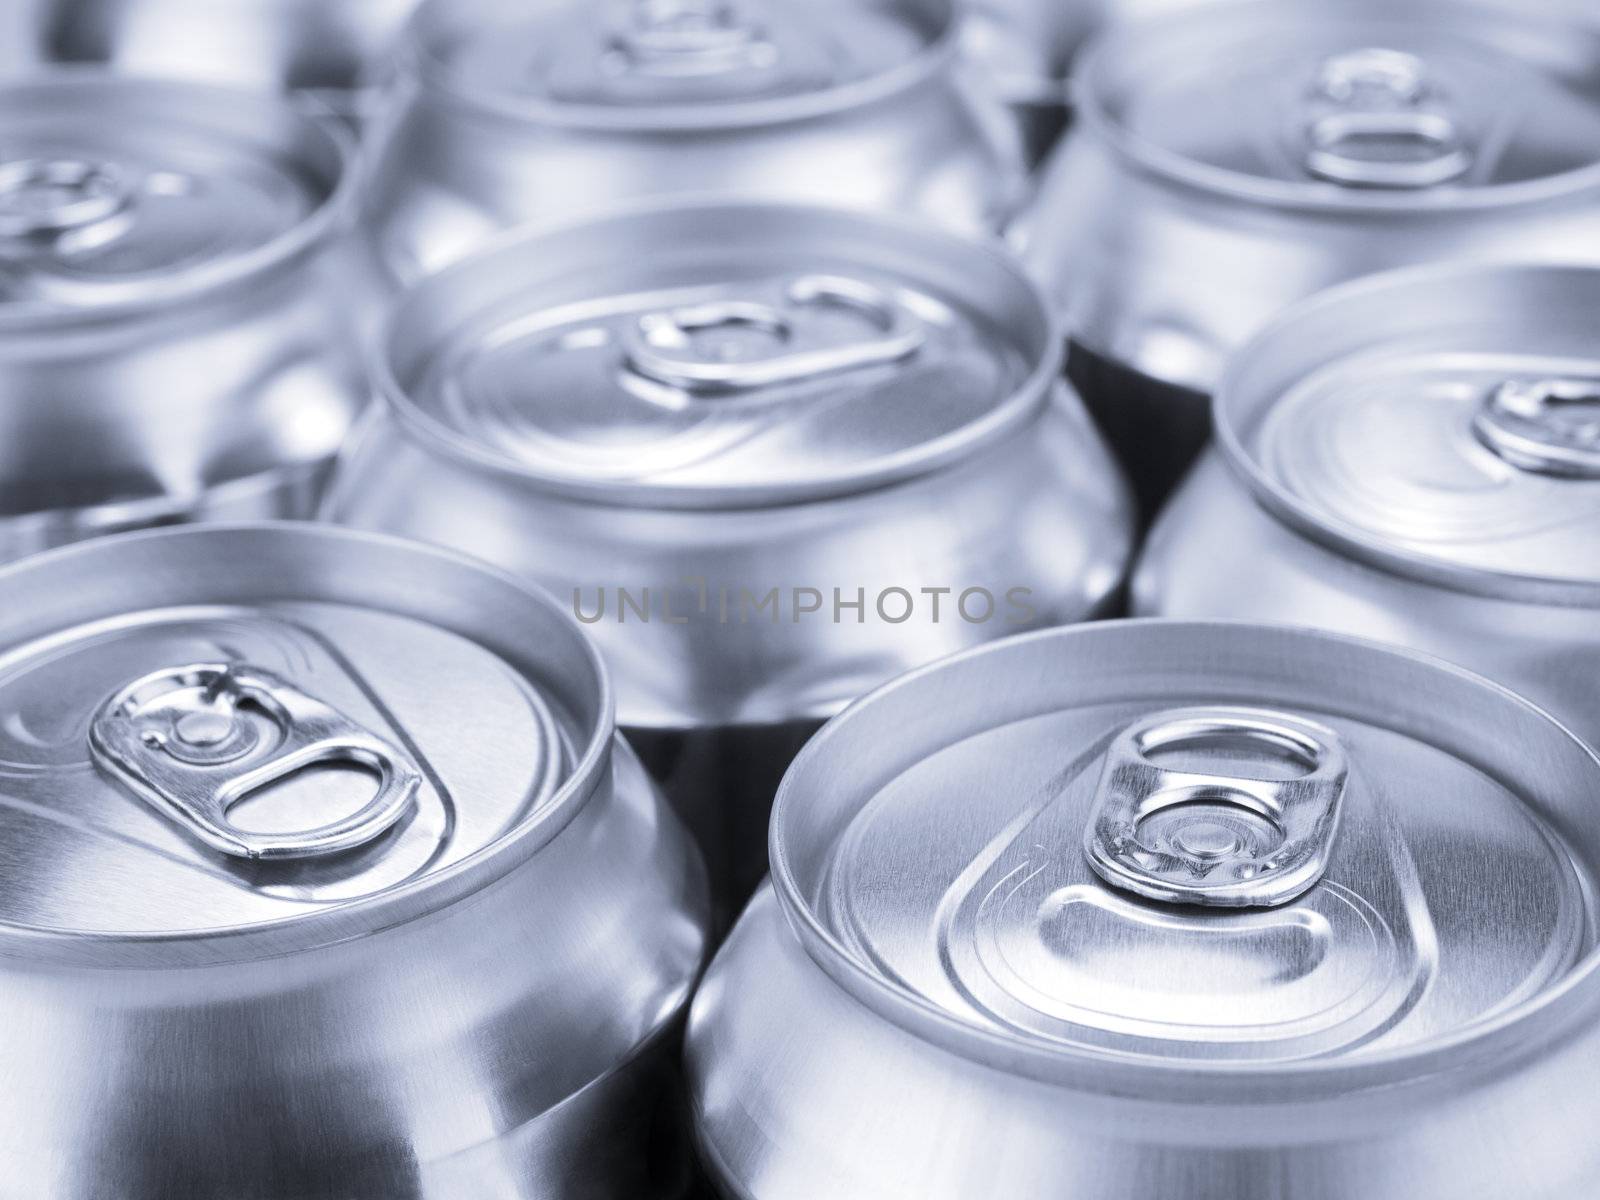 Several soda or beer cans. Shallow depth of field.